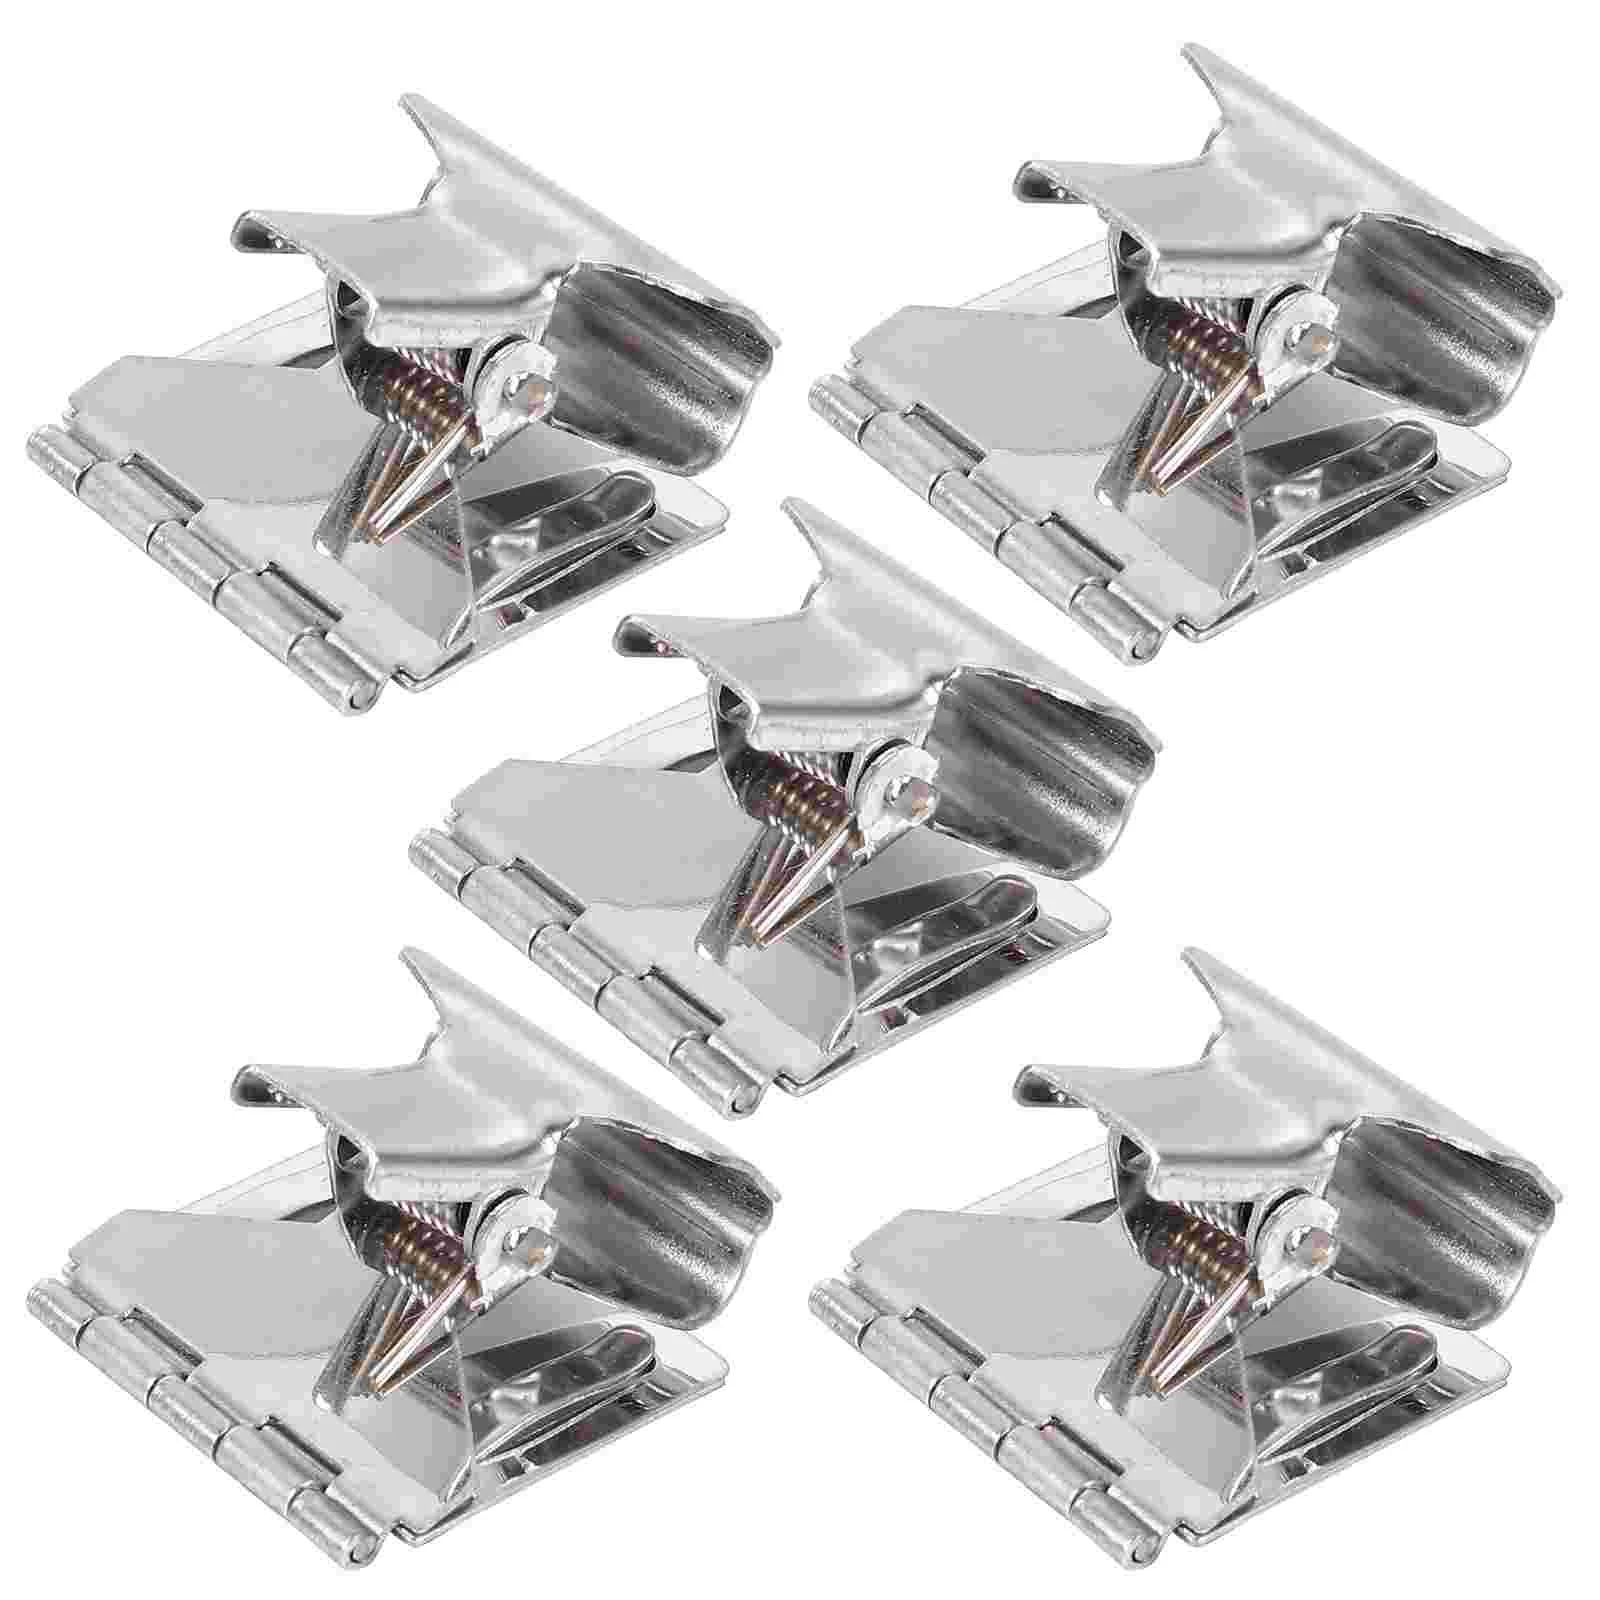 

5 Pcs Basket For Snacks Price Tag Clip Clips Label Clamps Promotional Holder Supermarkets Display Electroplated Iron